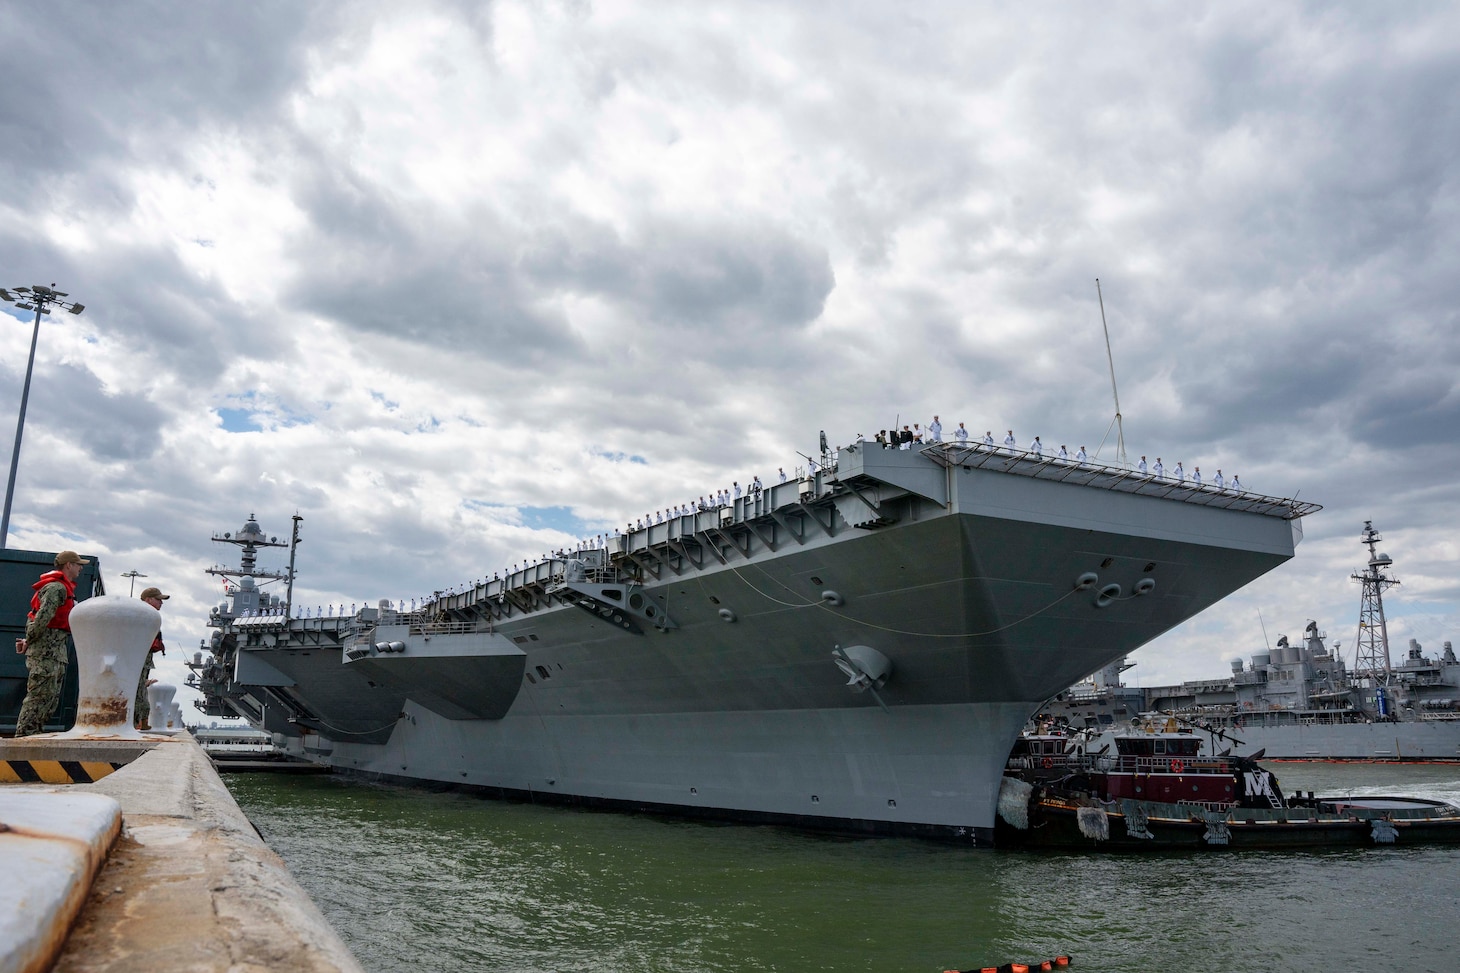 The capital ship of the Gerald R. Ford Carrier Strike Group (GRFCSG), the first-in-class aircraft carrier USS Gerald R. Ford (CVN 78), departs Naval Station Norfolk for a routine deployment, May 2.